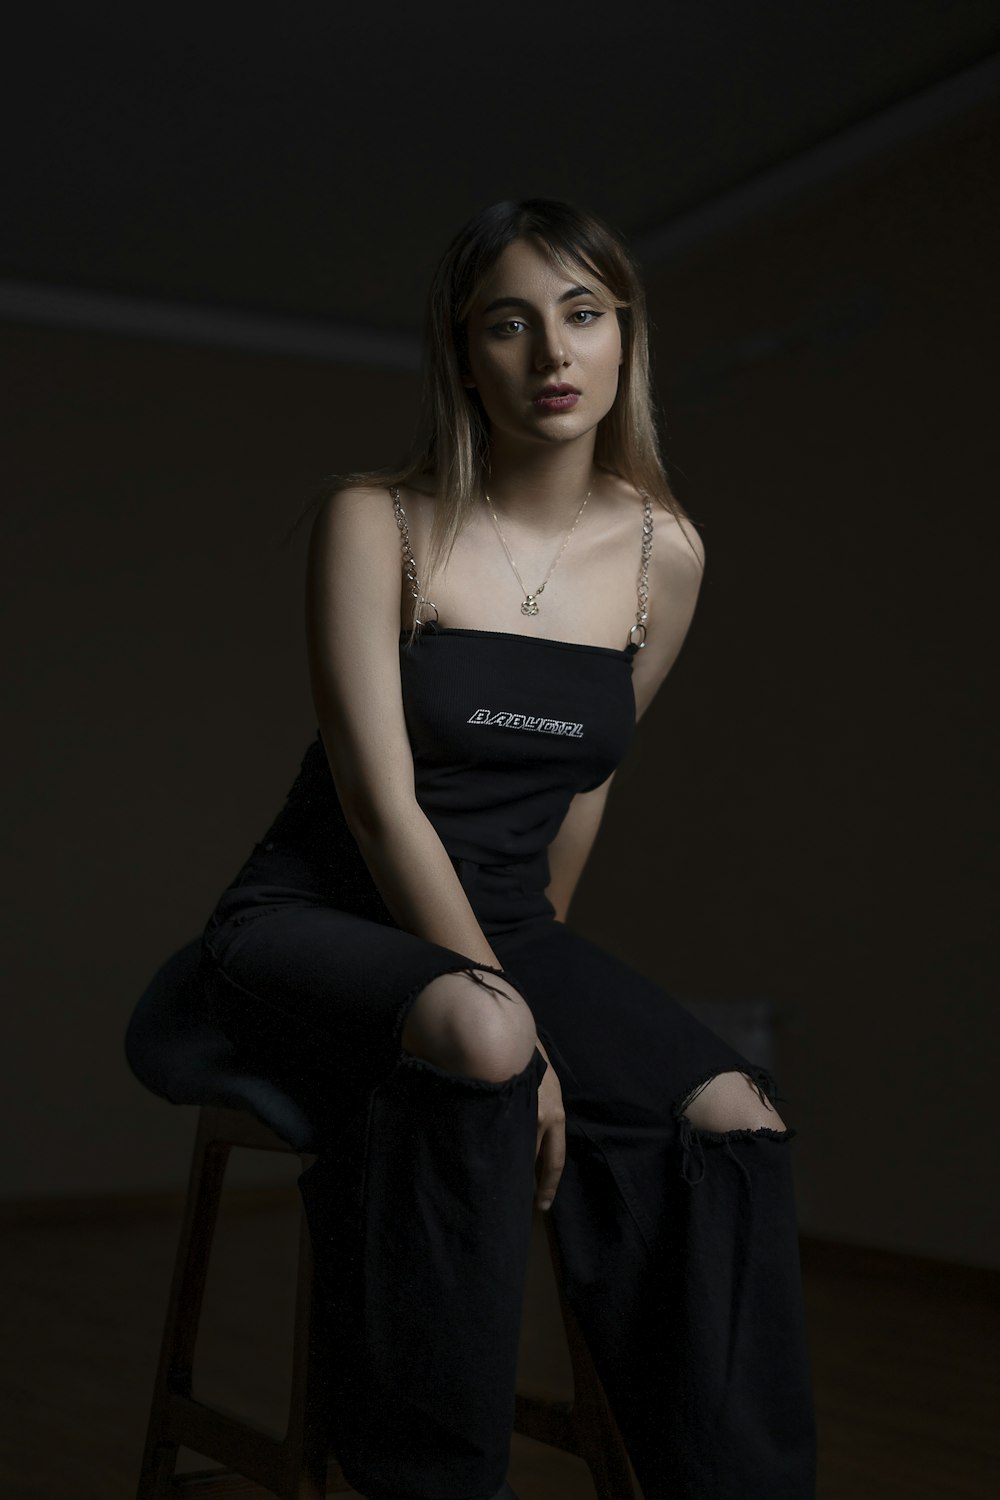 woman in black spaghetti strap top and black pants sitting on black chair